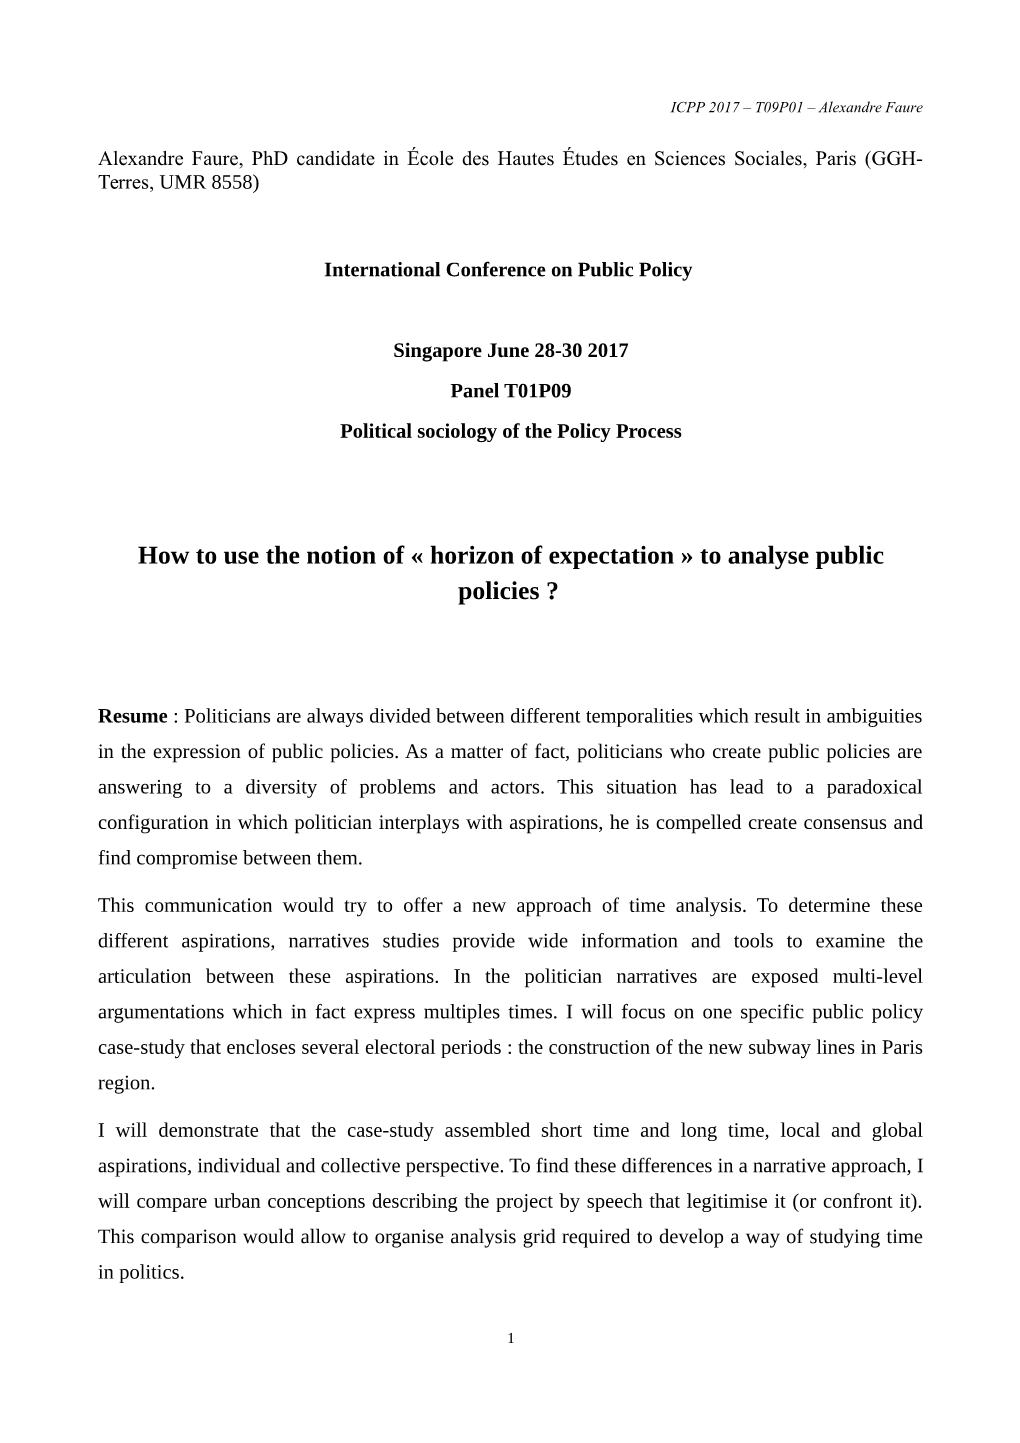 Horizon of Expectation » to Analyse Public Policies ?